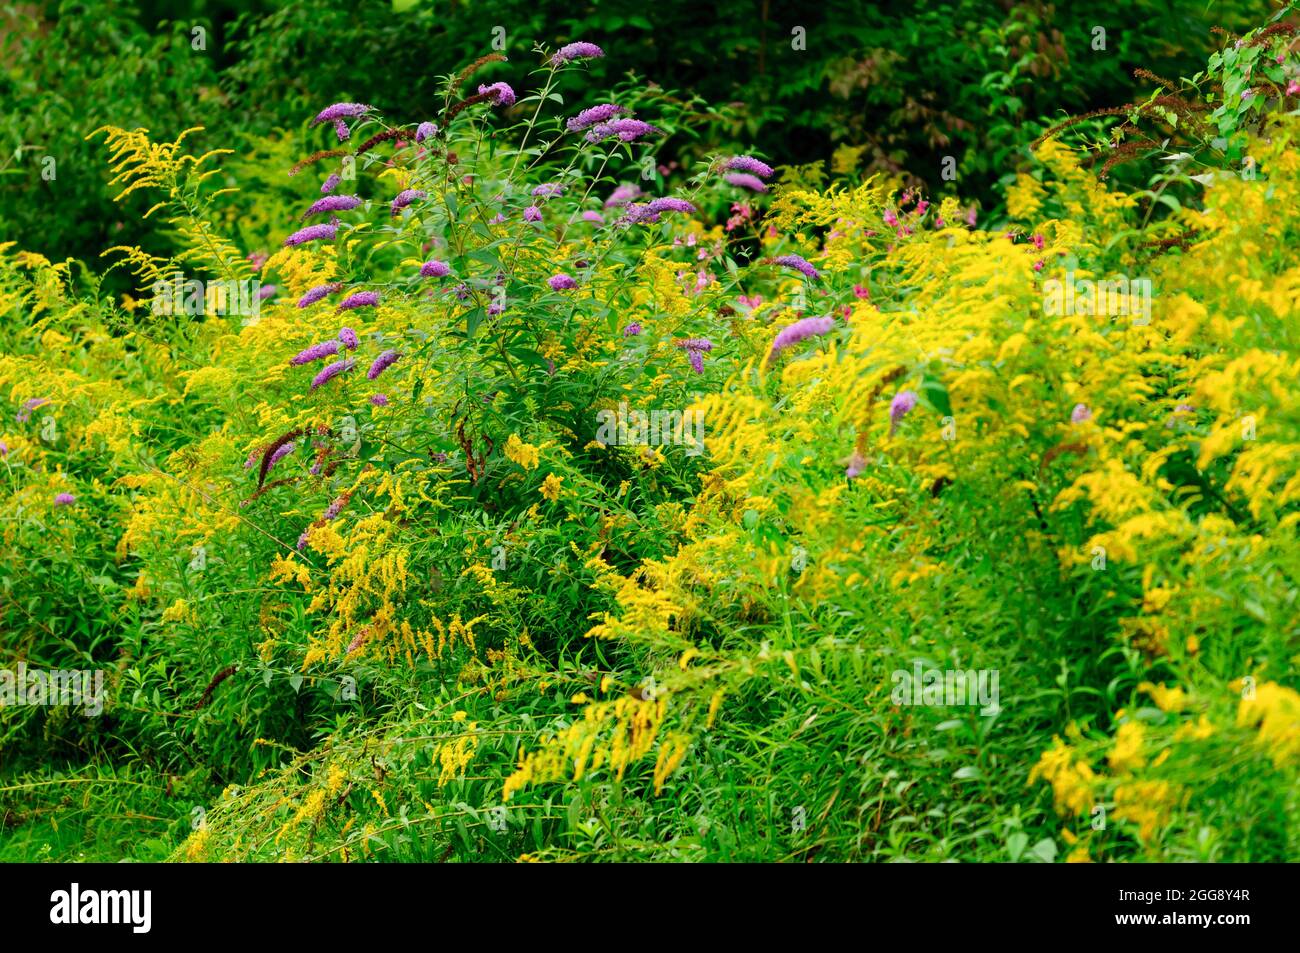 European goldenrod, Solidago virgaurea in a riverside forest nearby the danube river in lower austria Stock Photo